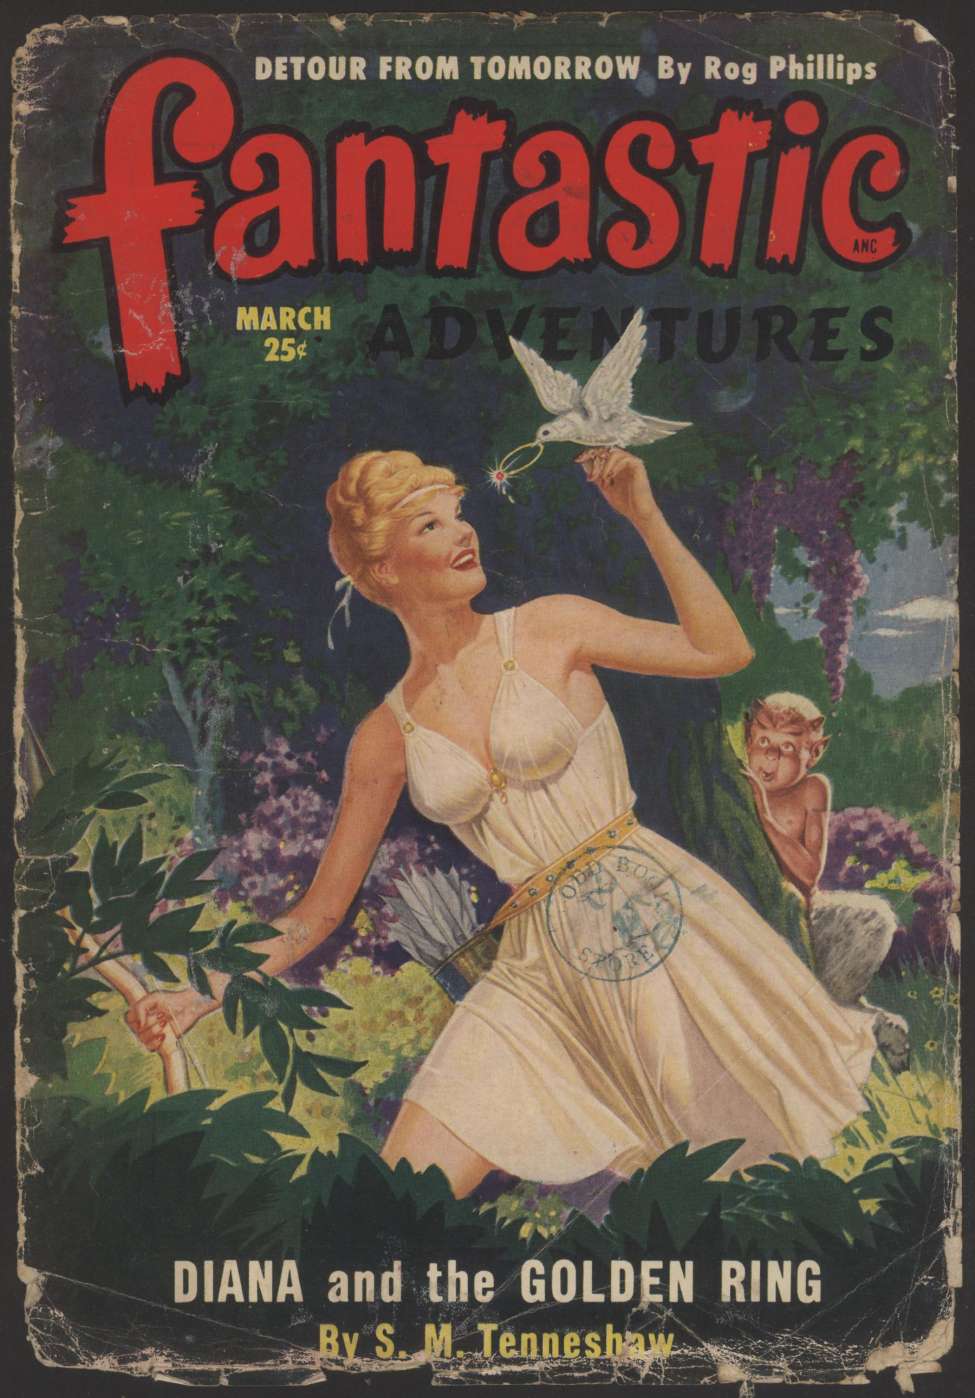 Comic Book Cover For Fantastic Adventures v12 3 - Diana and the Golden Ring - S. M. Tenneshaw